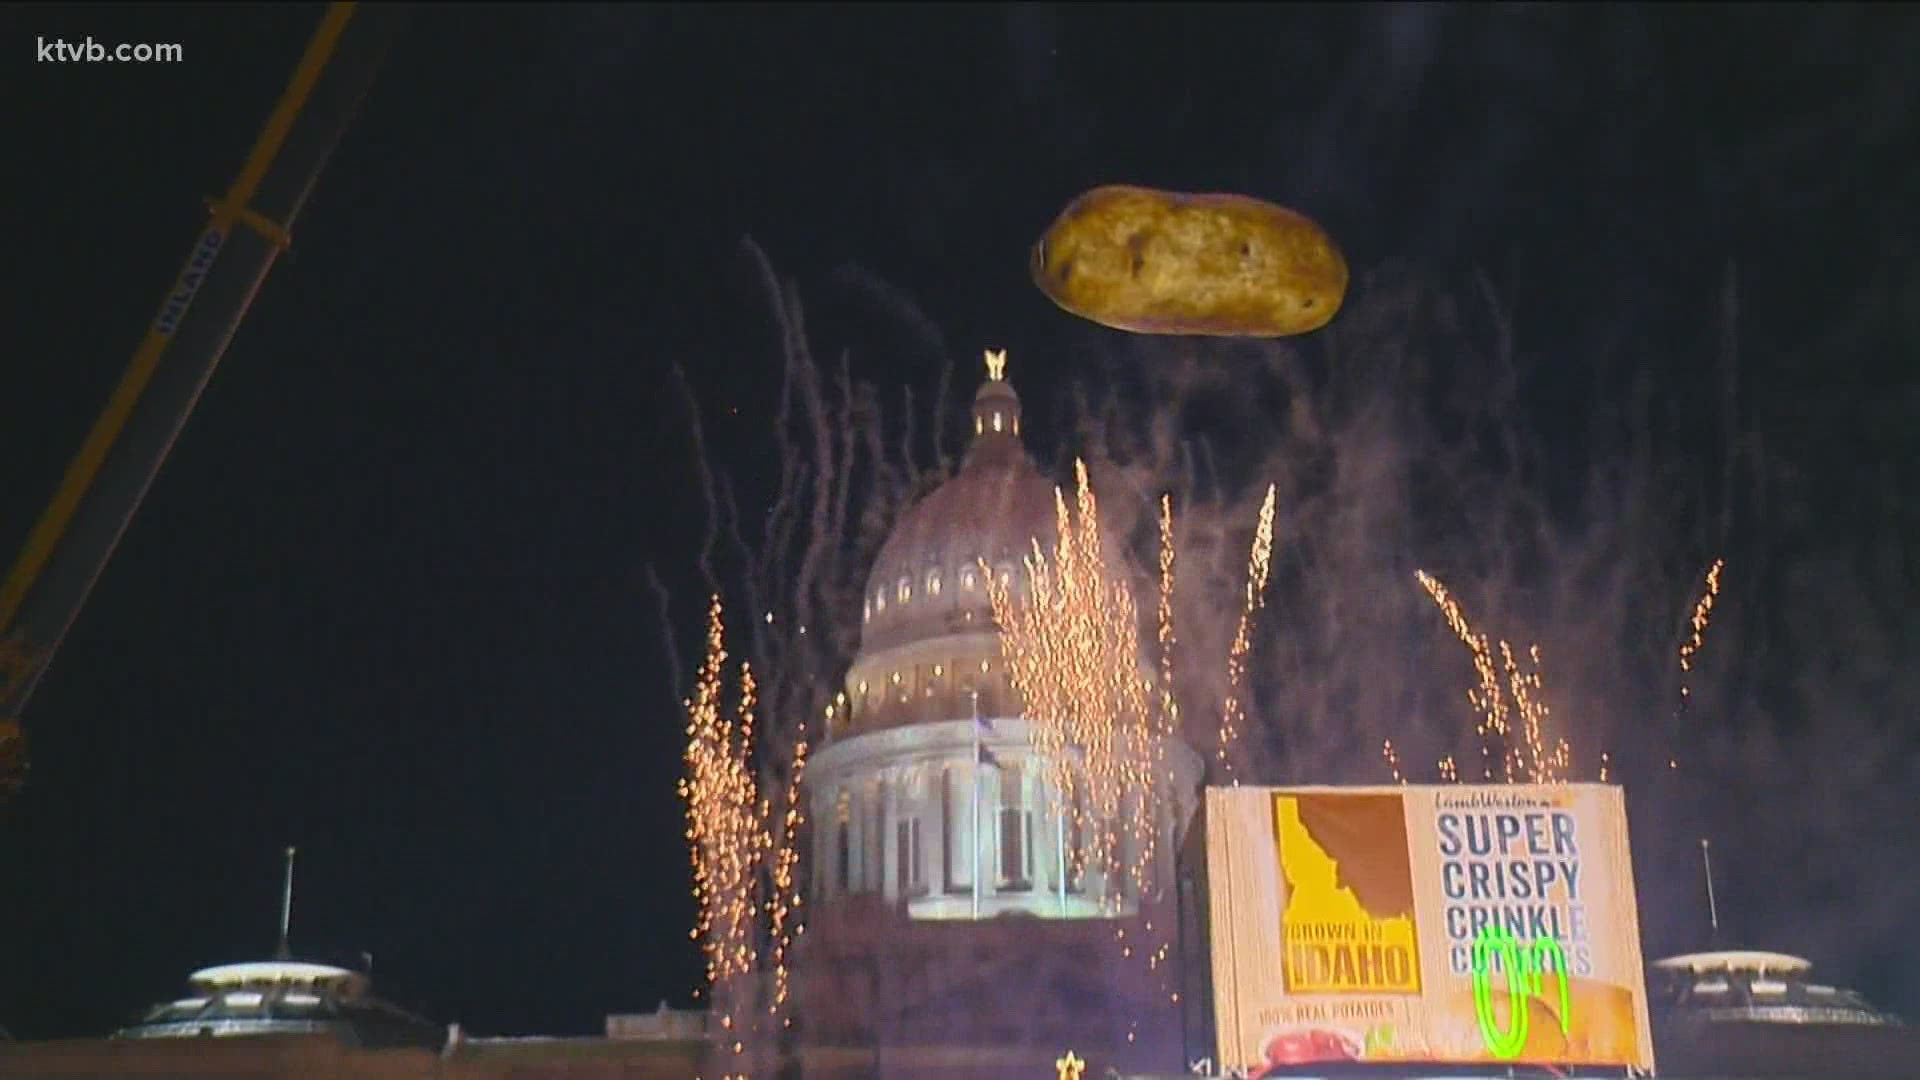 The Idaho Potato Drop, Emmett Cherry Rise, and Rupert Sugar Beet Drop all made some changes to their events because of the pandemic.